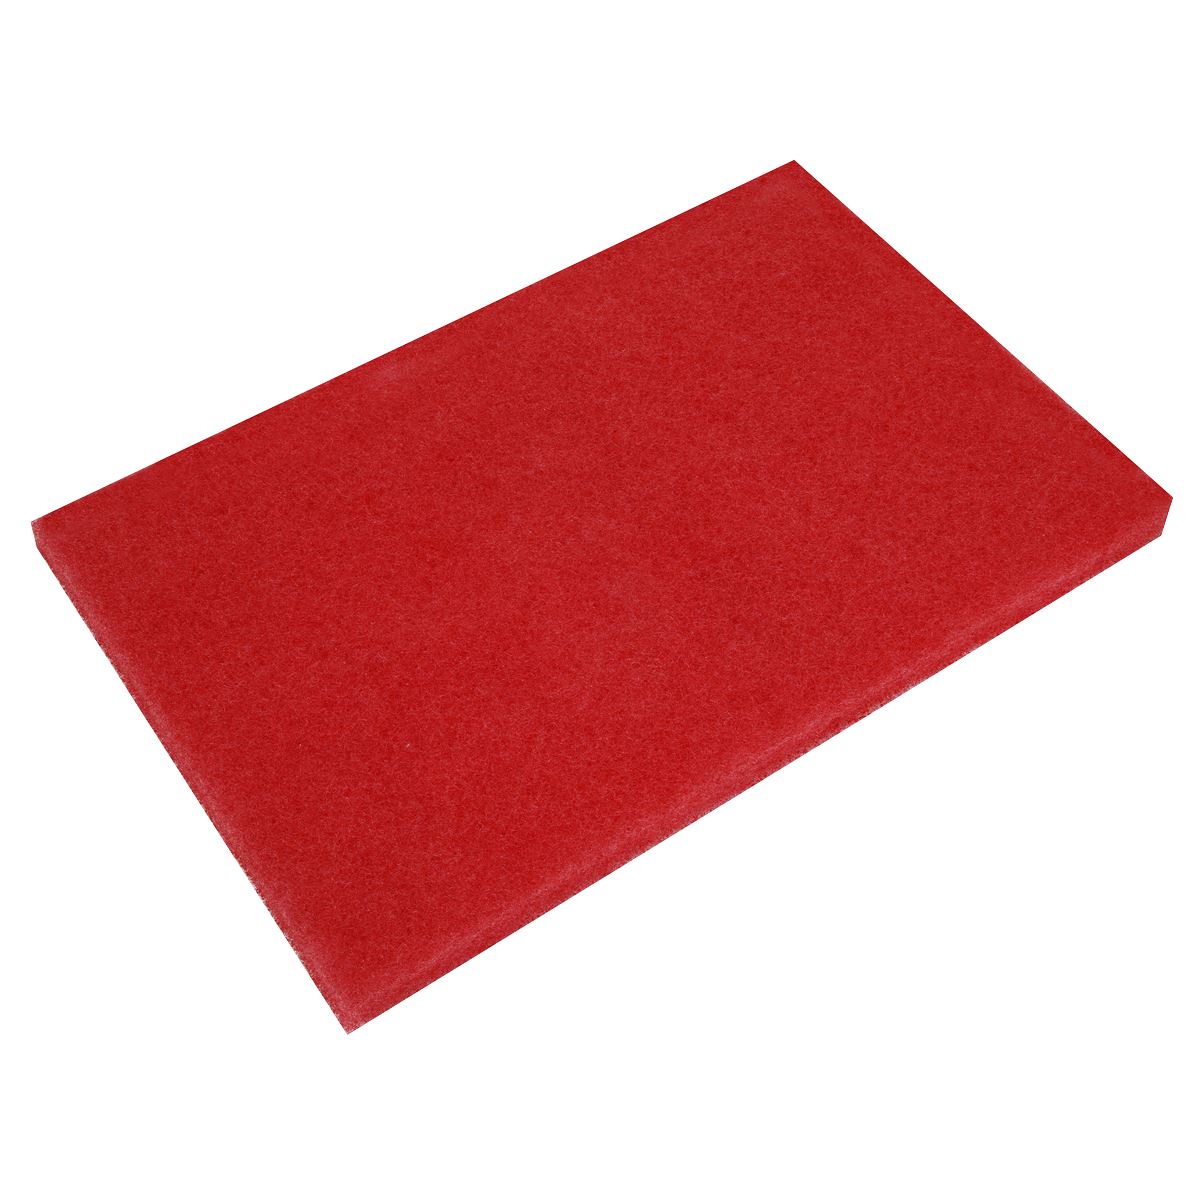 Worksafe by Sealey Red Buffing Pads 12 x 18 x 1" - Pack of 5